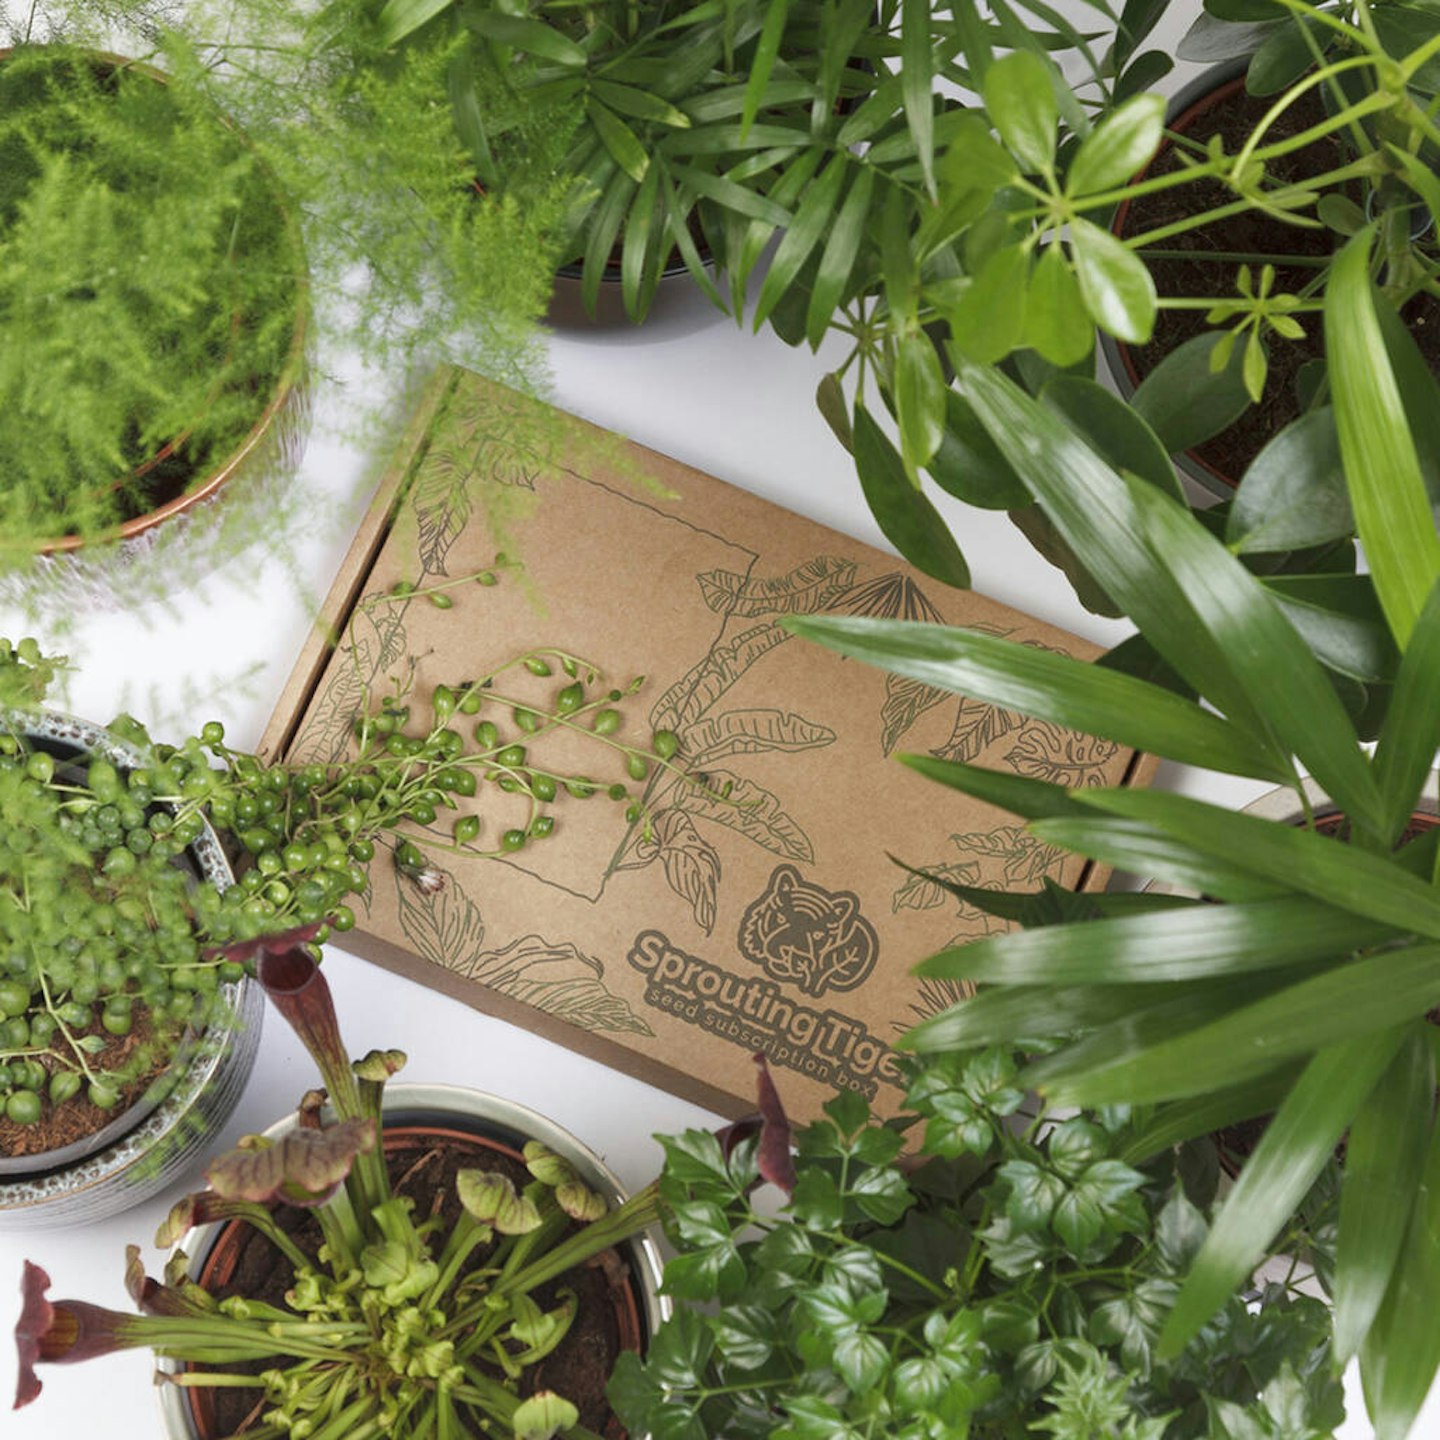 Monthly Tropical Houseplant Seed Subscription Box